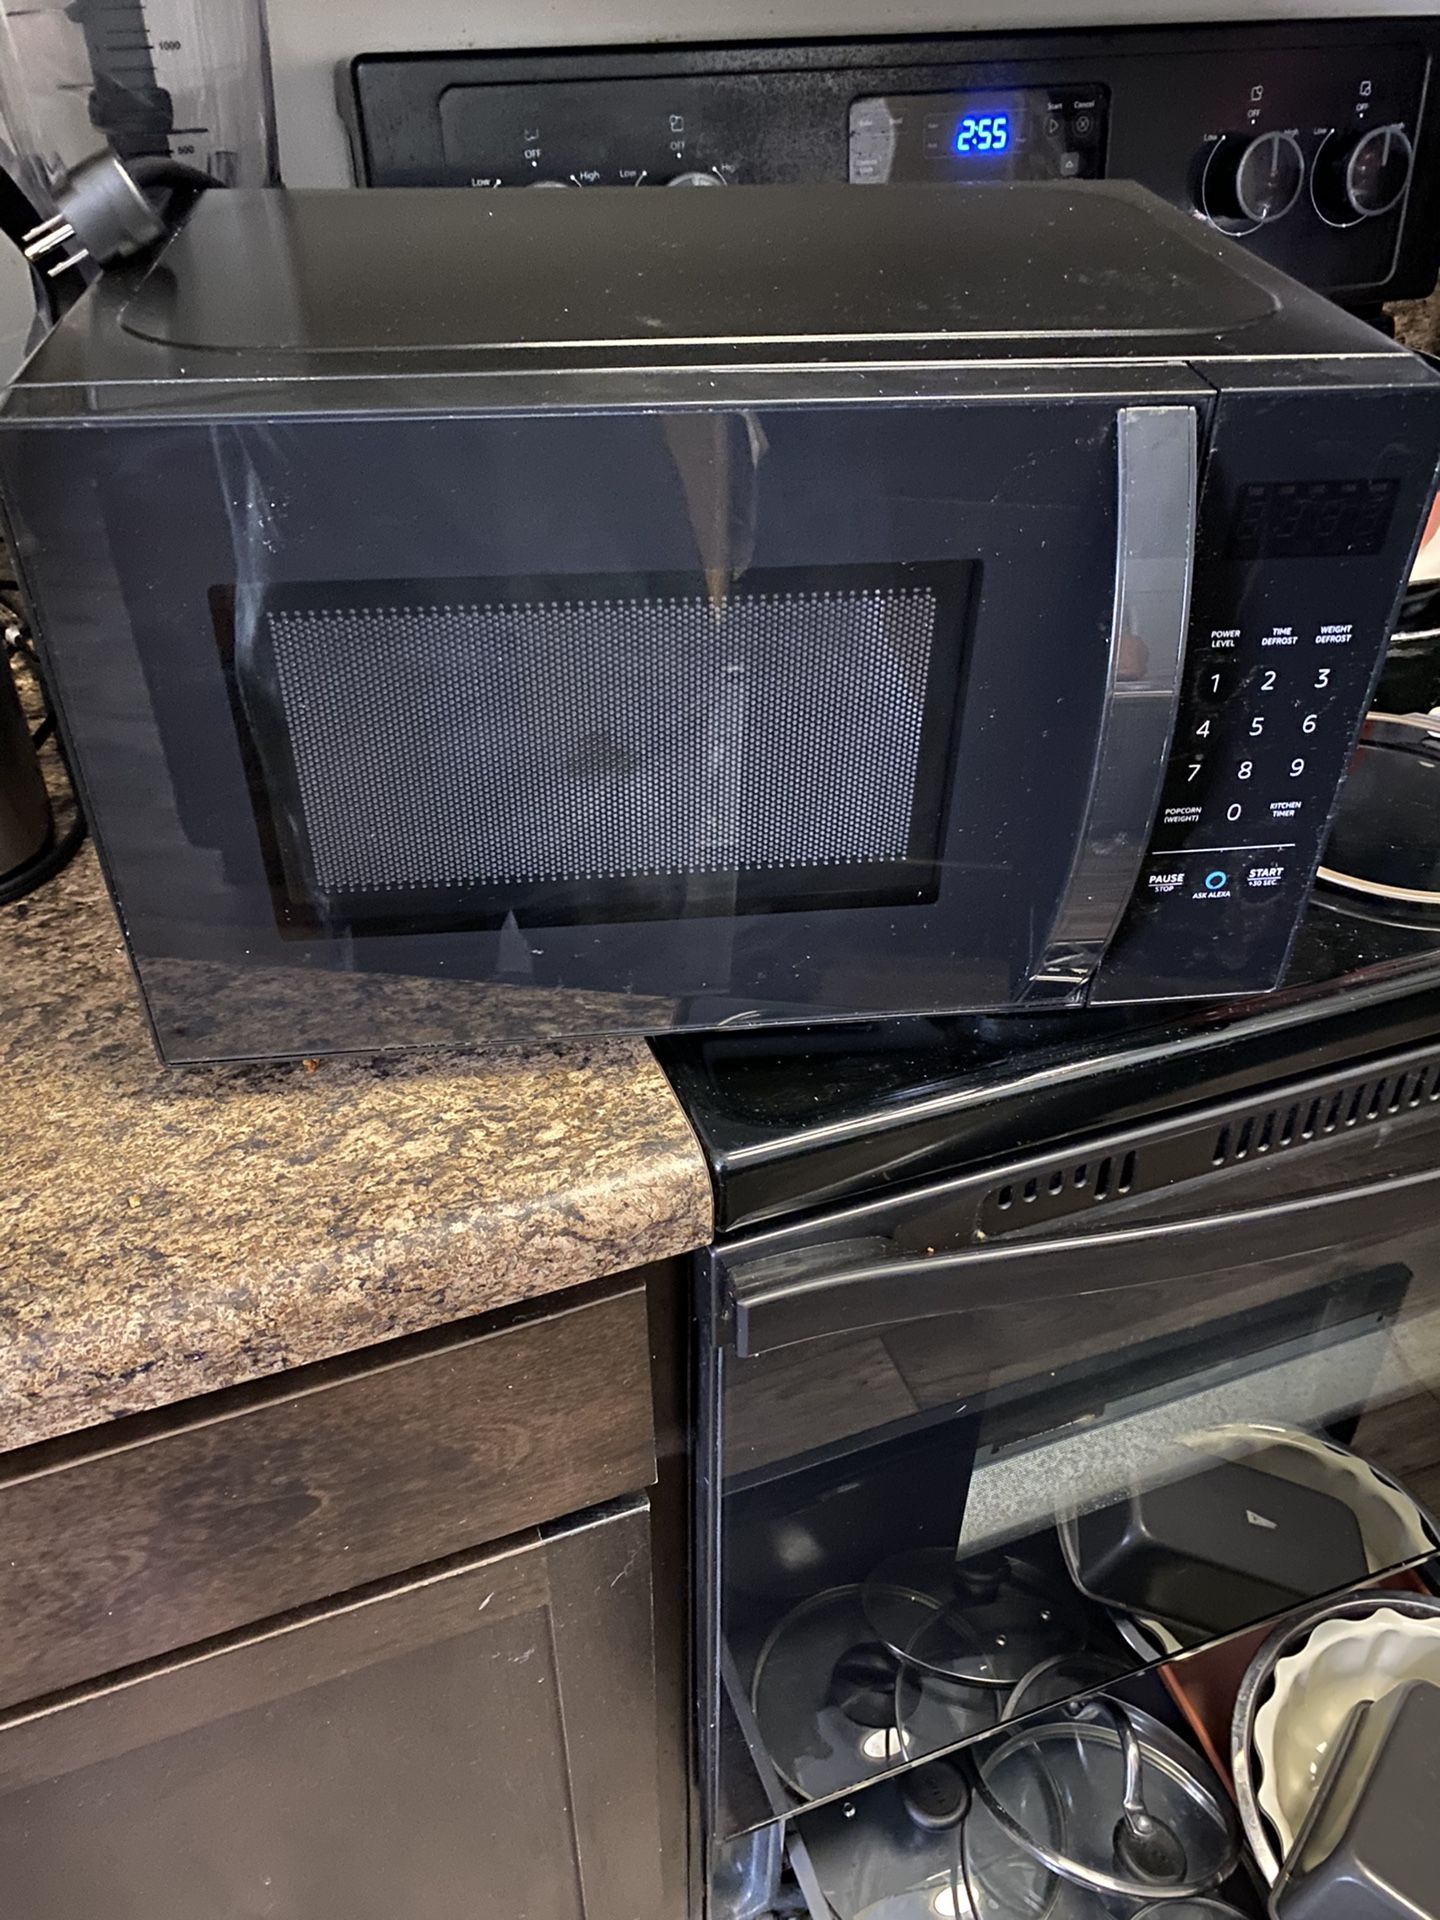 Black smart microwave oven (works with Alexa)